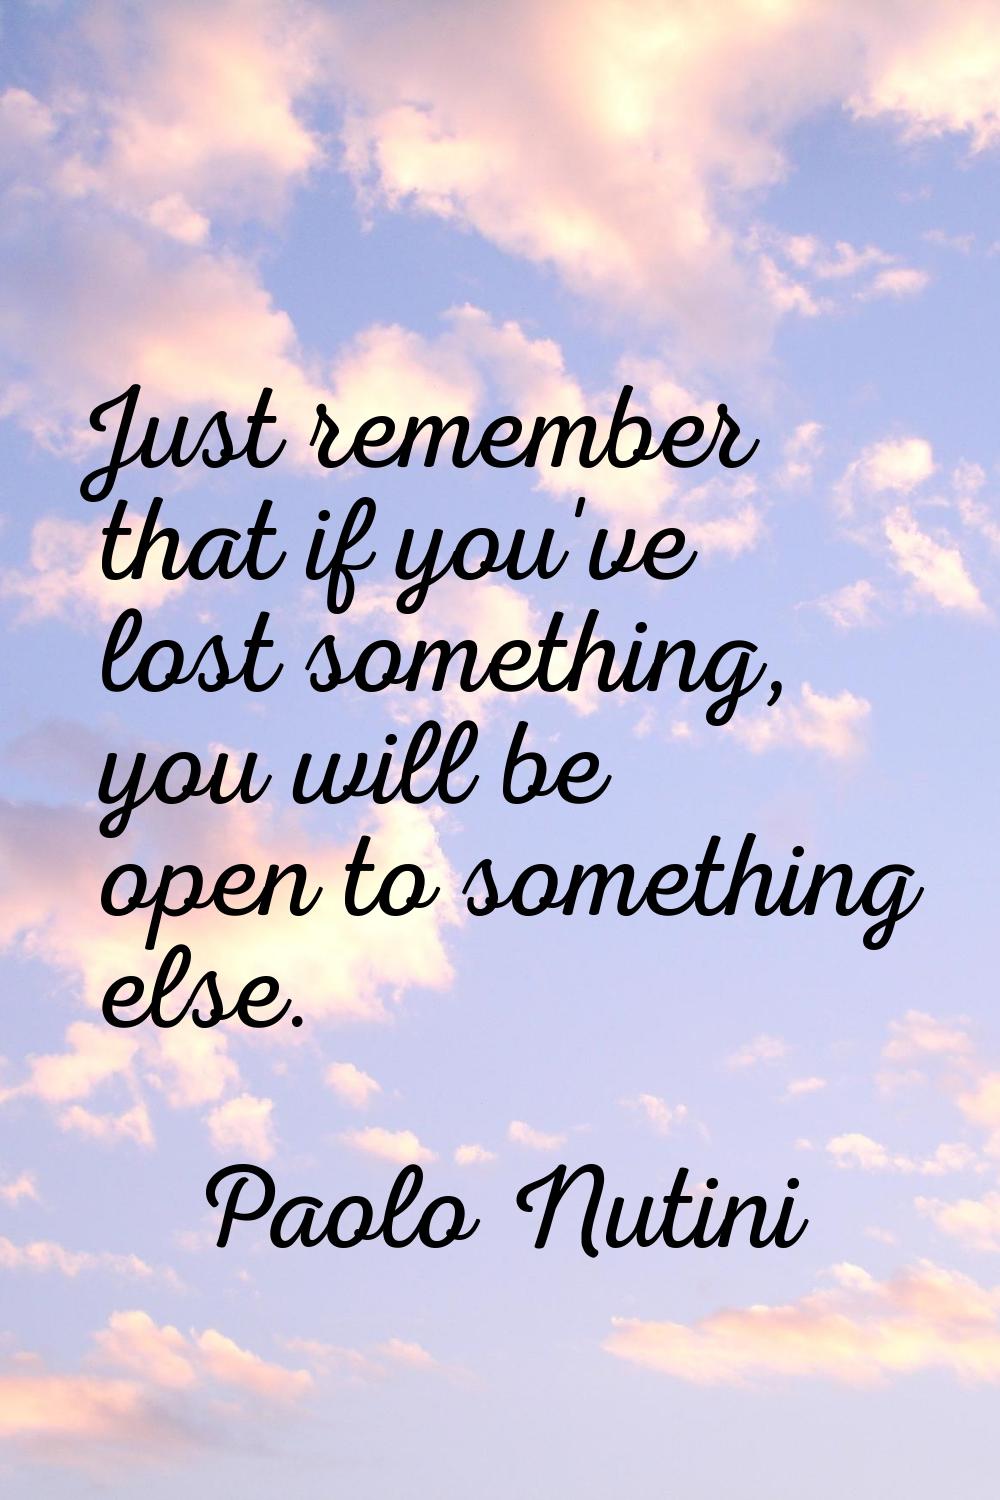 Just remember that if you've lost something, you will be open to something else.